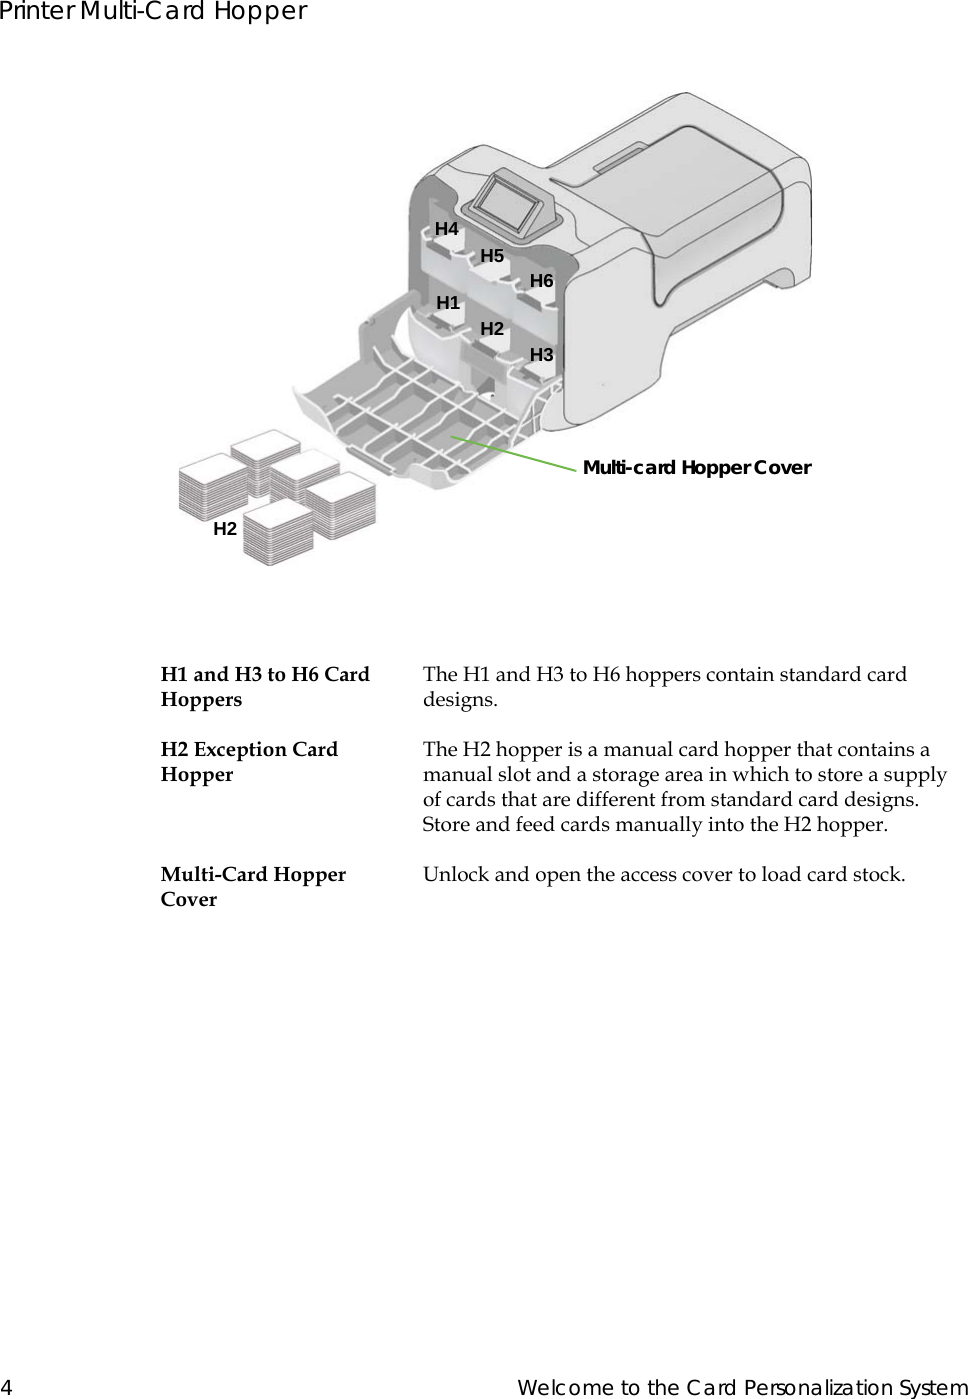  4 Welcome to the Card Personalization SystemPrinter Multi-Card HopperH1 and H3 to H6 Card HoppersThe H1 and H3 to H6 hoppers contain standard card designs.H2 Exception Card HopperThe H2 hopper is a manual card hopper that contains a manual slot and a storage area in which to store a supply of cards that are different from standard card designs. Store and feed cards manually into the H2 hopper.Multi-Card Hopper CoverUnlock and open the access cover to load card stock.H1H2H3H4H5H6H2Multi-card Hopper Cover